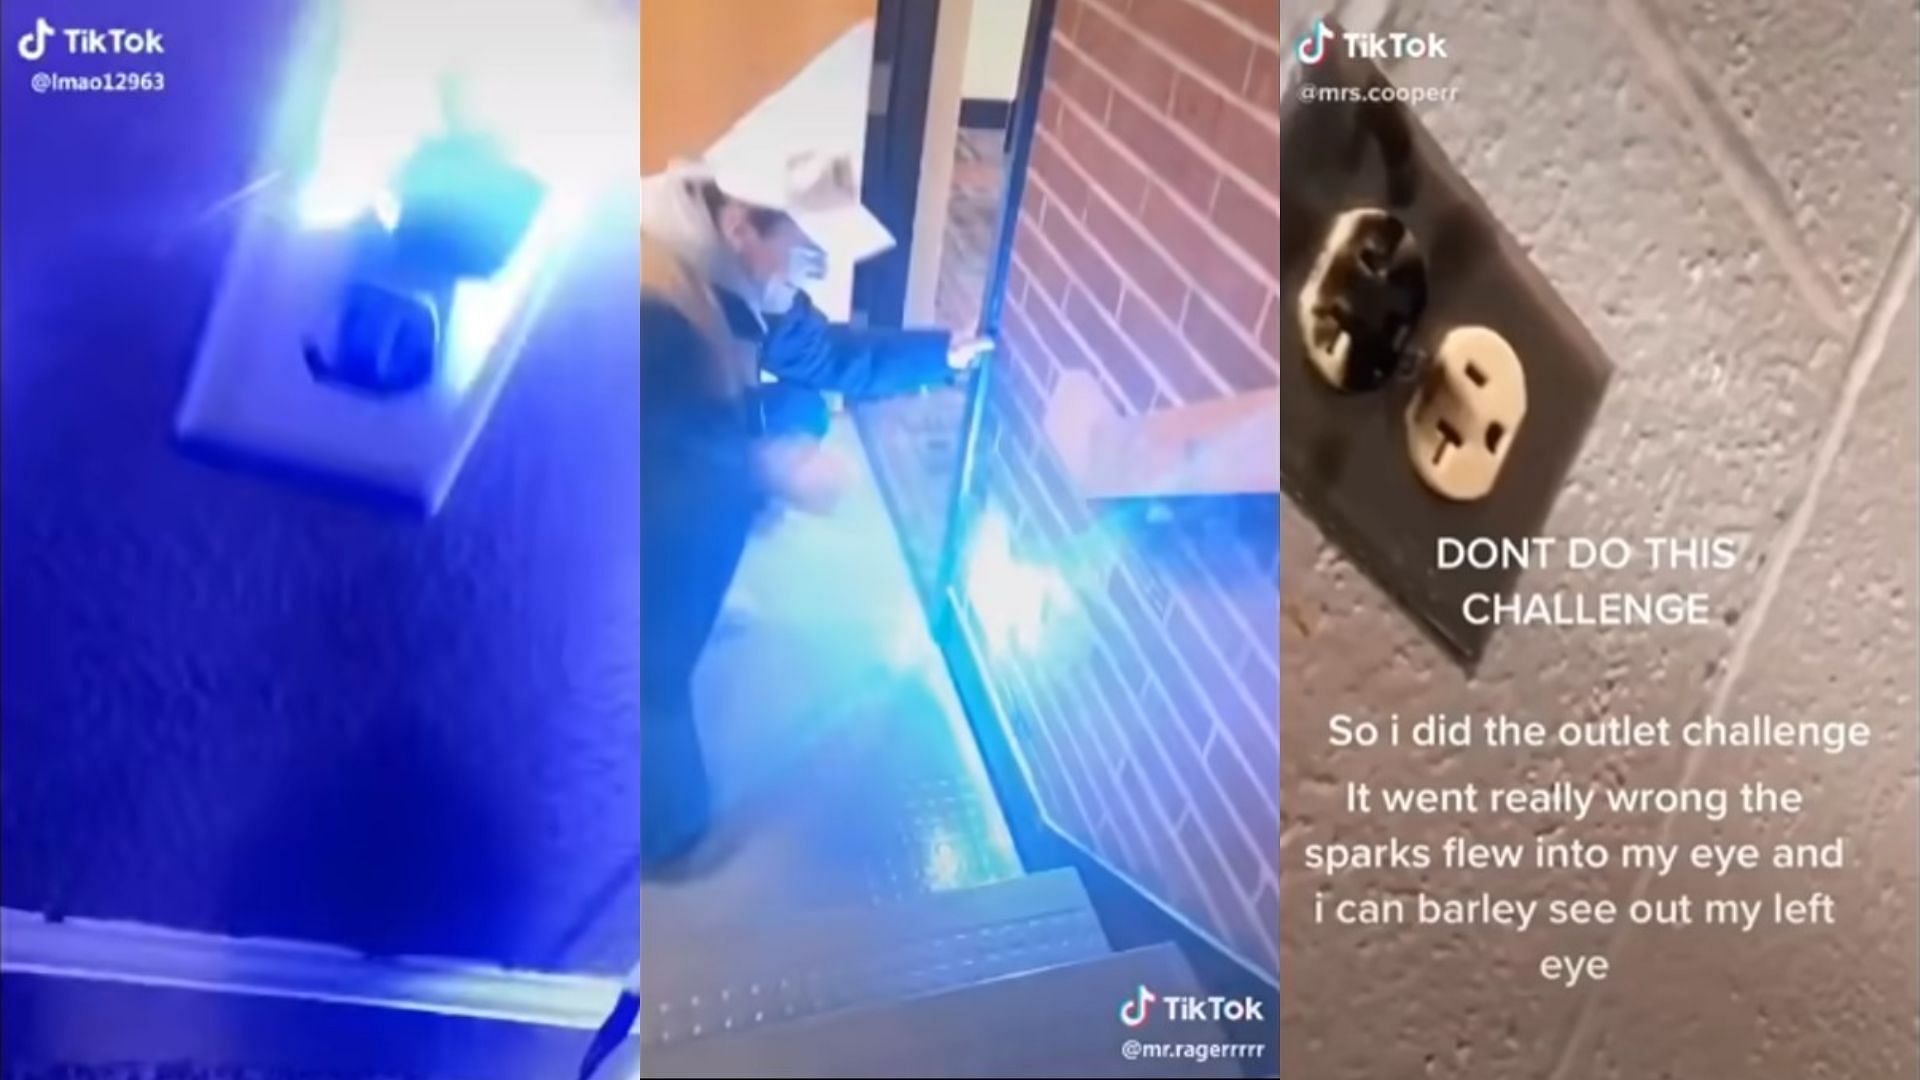 The Penny Challenge can lead to electrical system damage, fires or other bodily harm (Images via lmao12963/TikTok, mr.ragerrrrr/TikTok, and mrs.cooperr/TikTok)